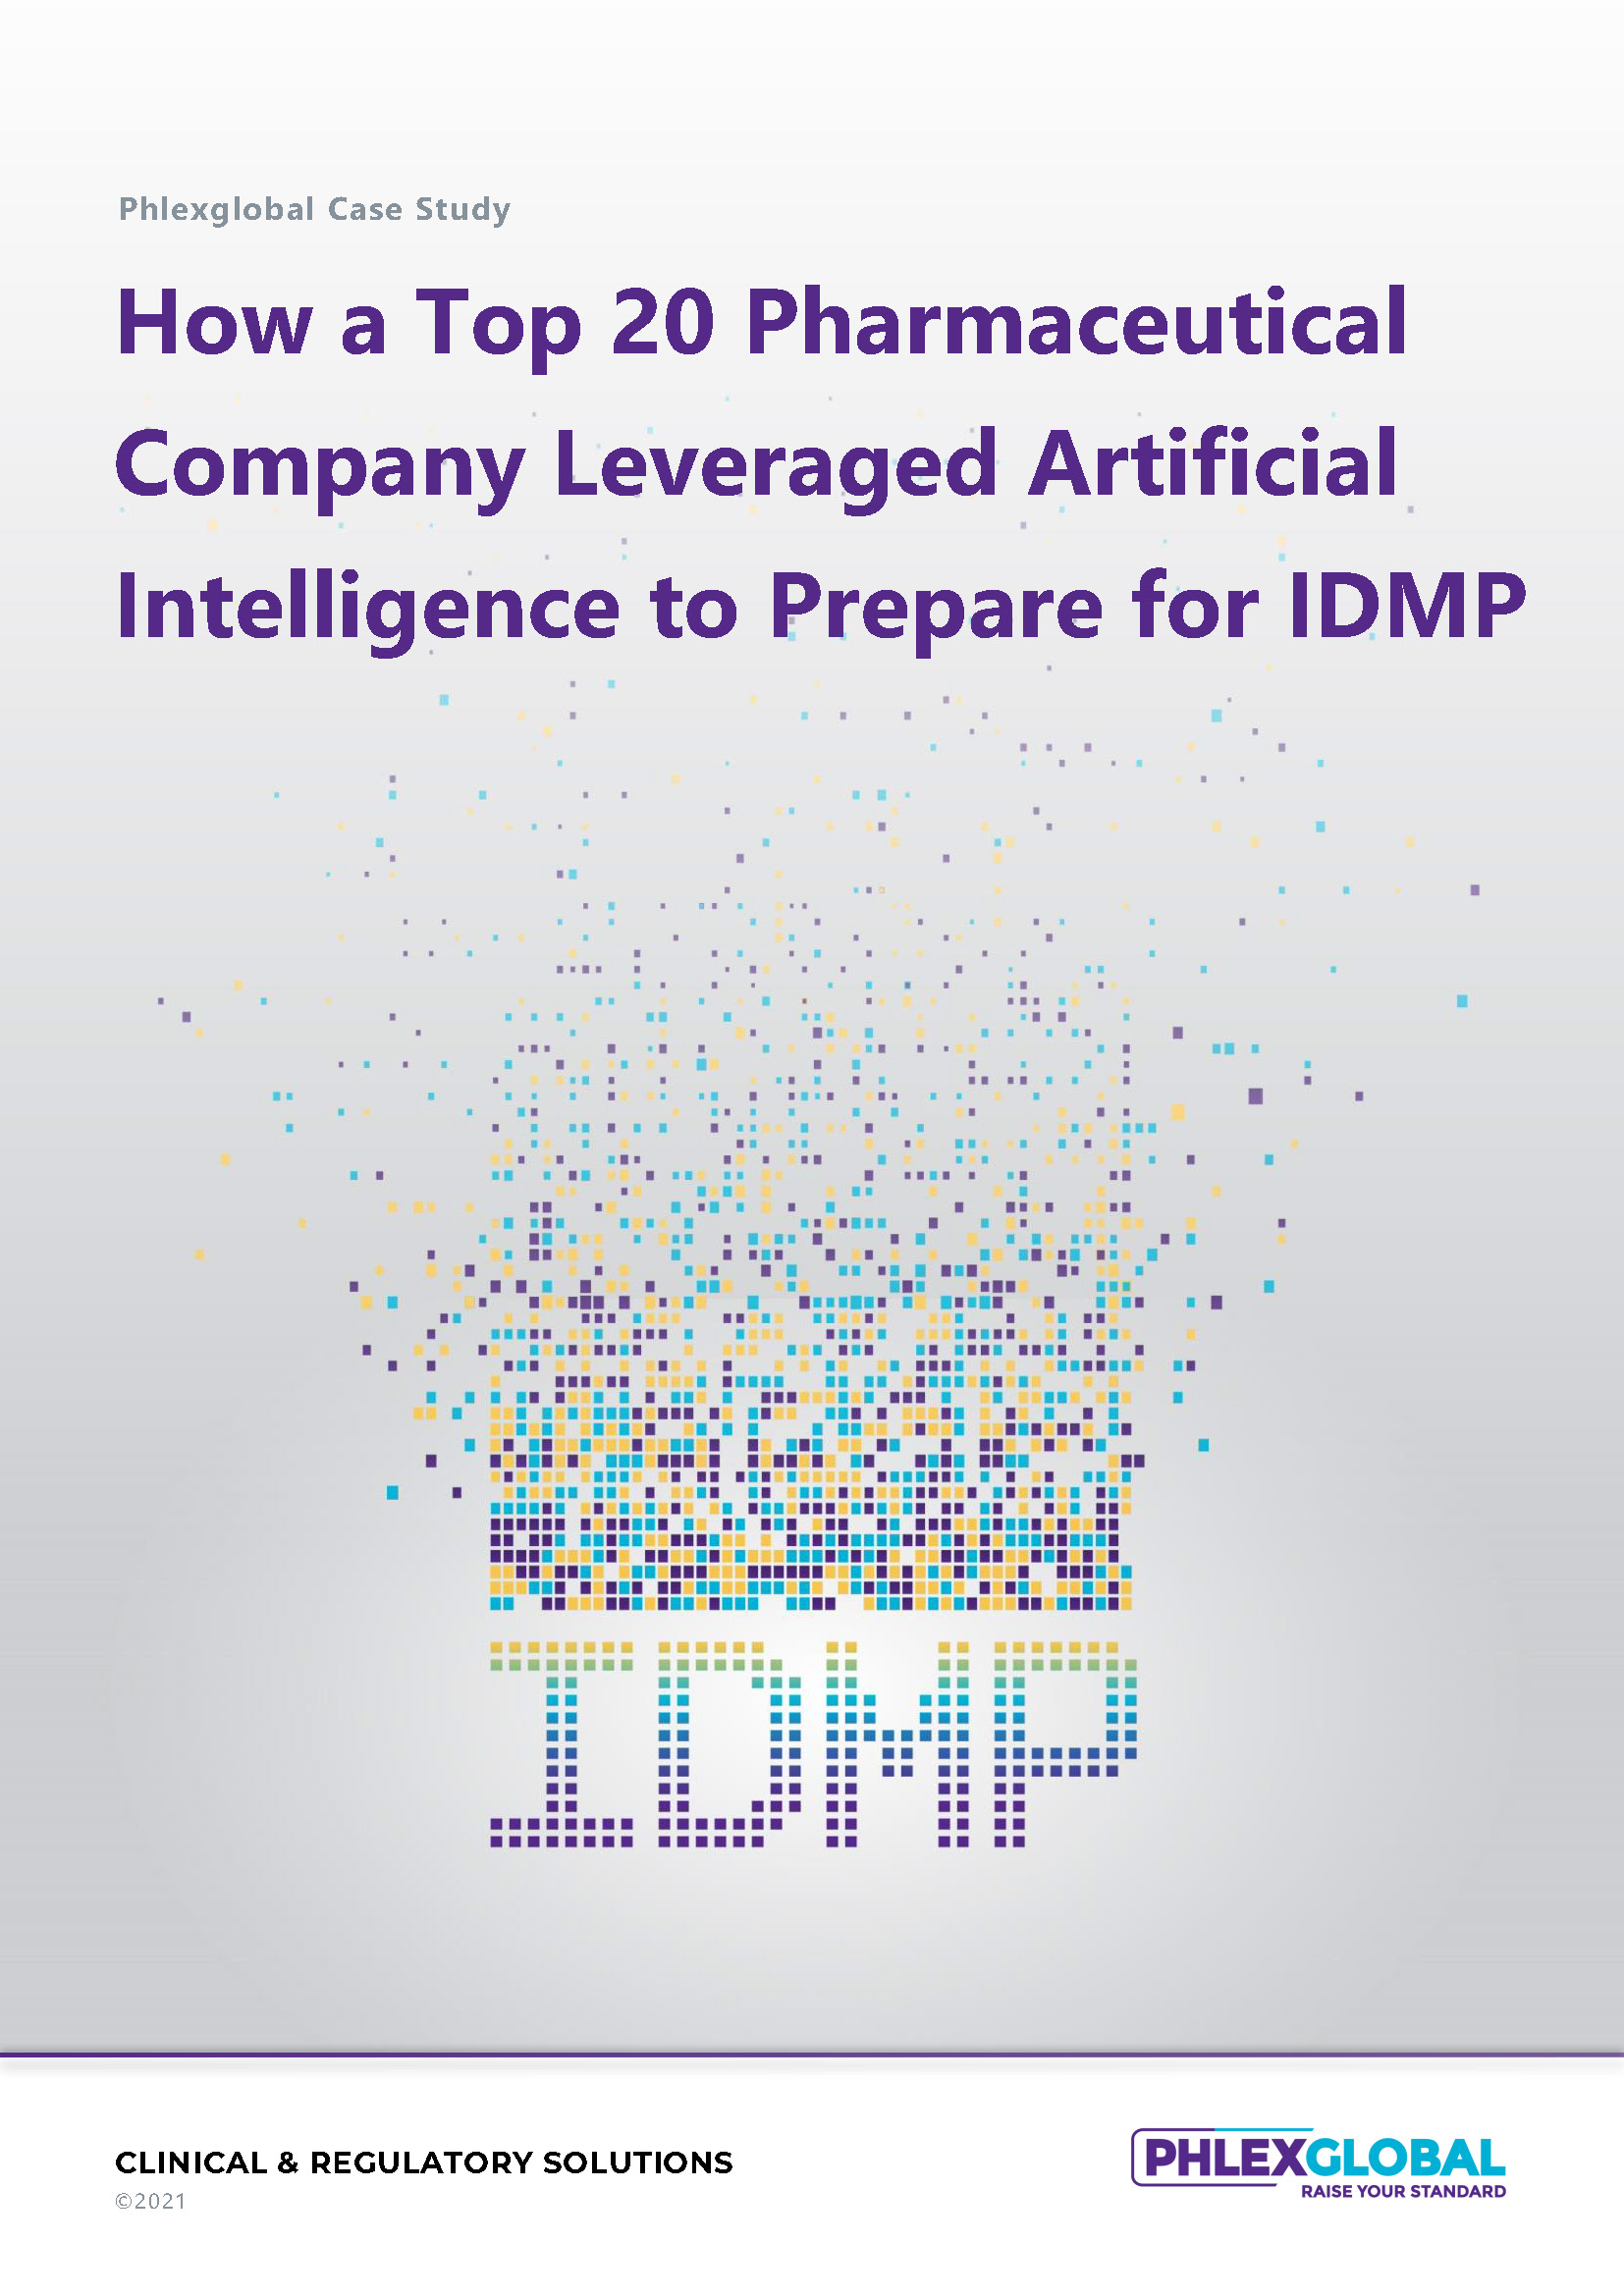 Phlexglobal Case Study - Automating IDMP Data Mining at a Top 20 Pharma_Page_1